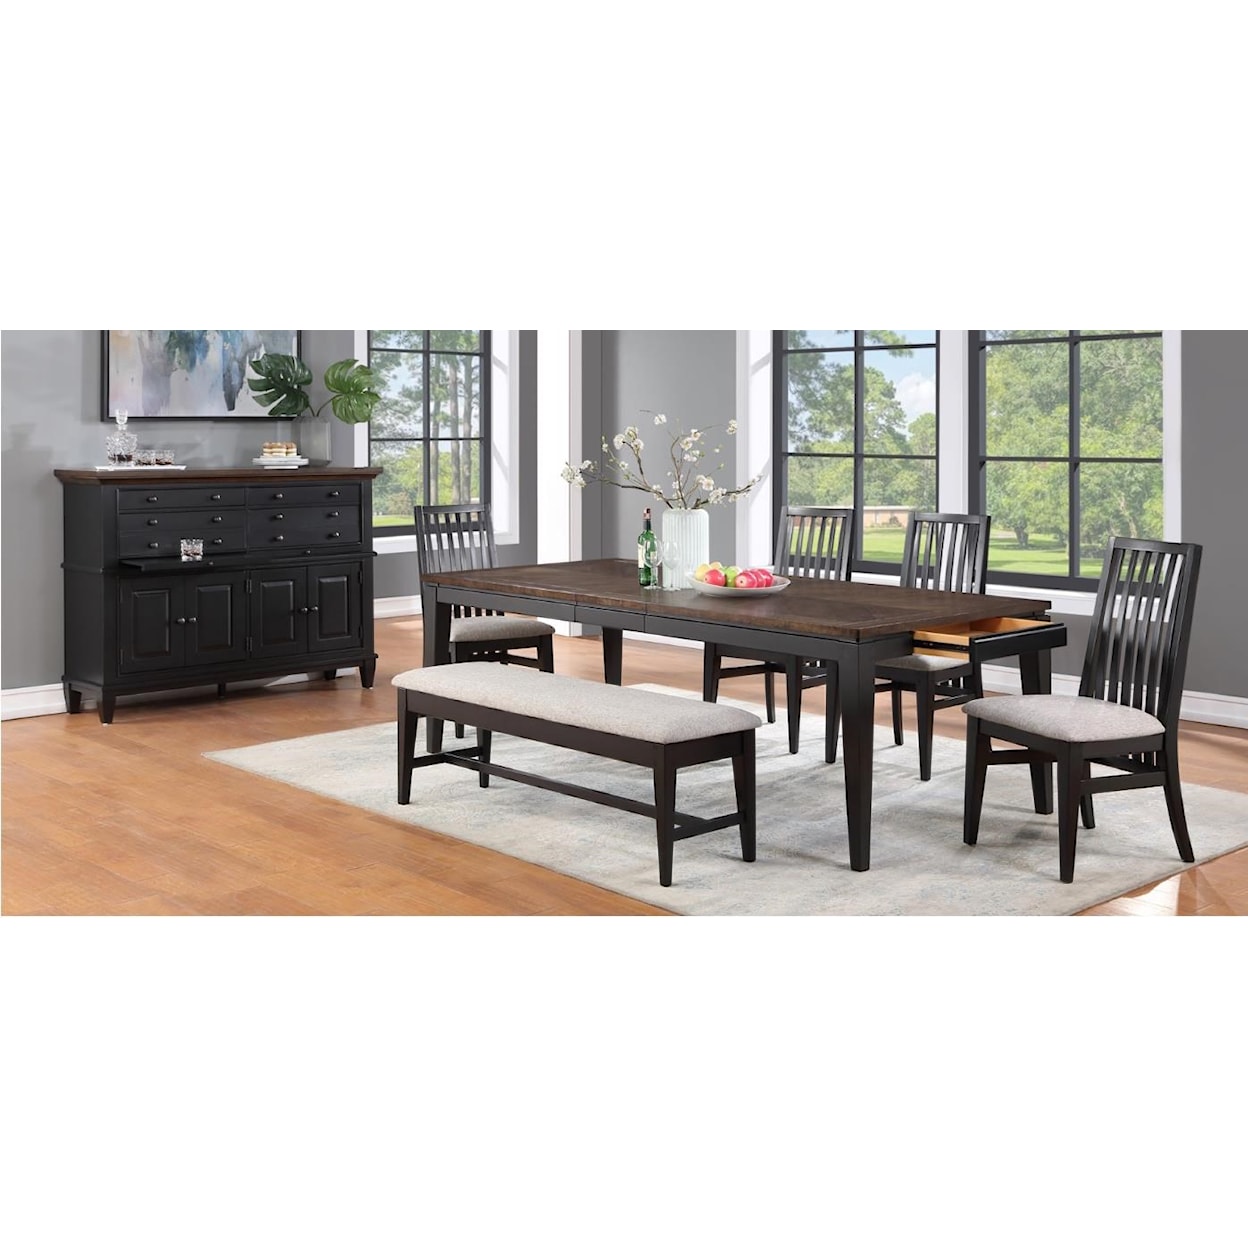 Warehouse M Lakeside 5 Piece Dining Set with Bench